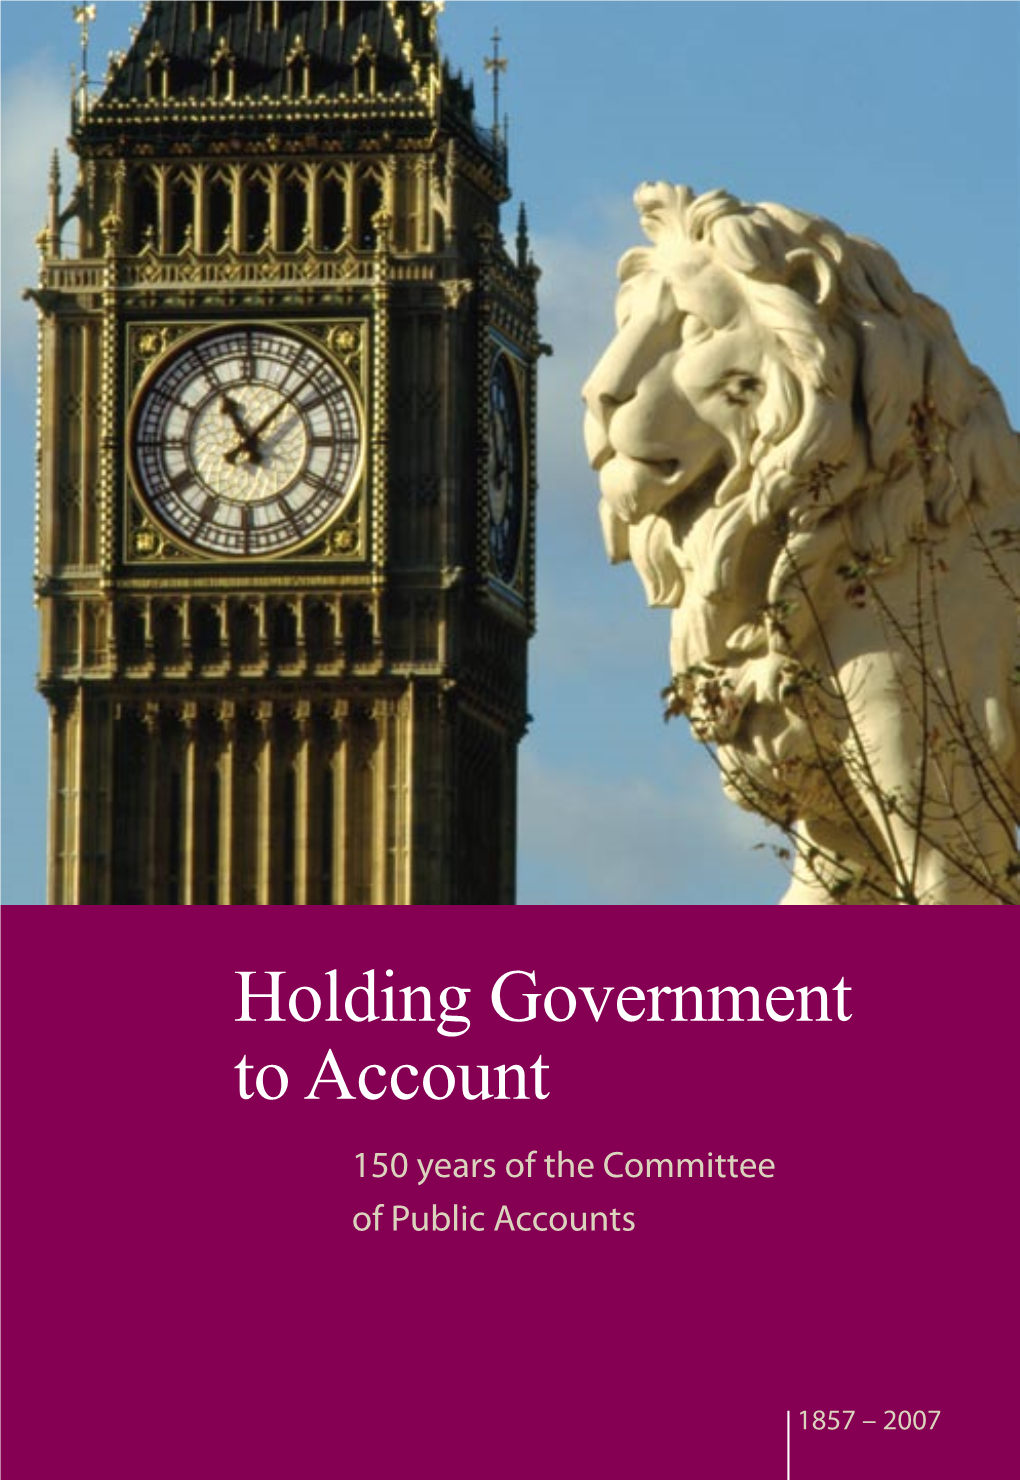 Holding Government to Account—150 Years of the Committee of Public